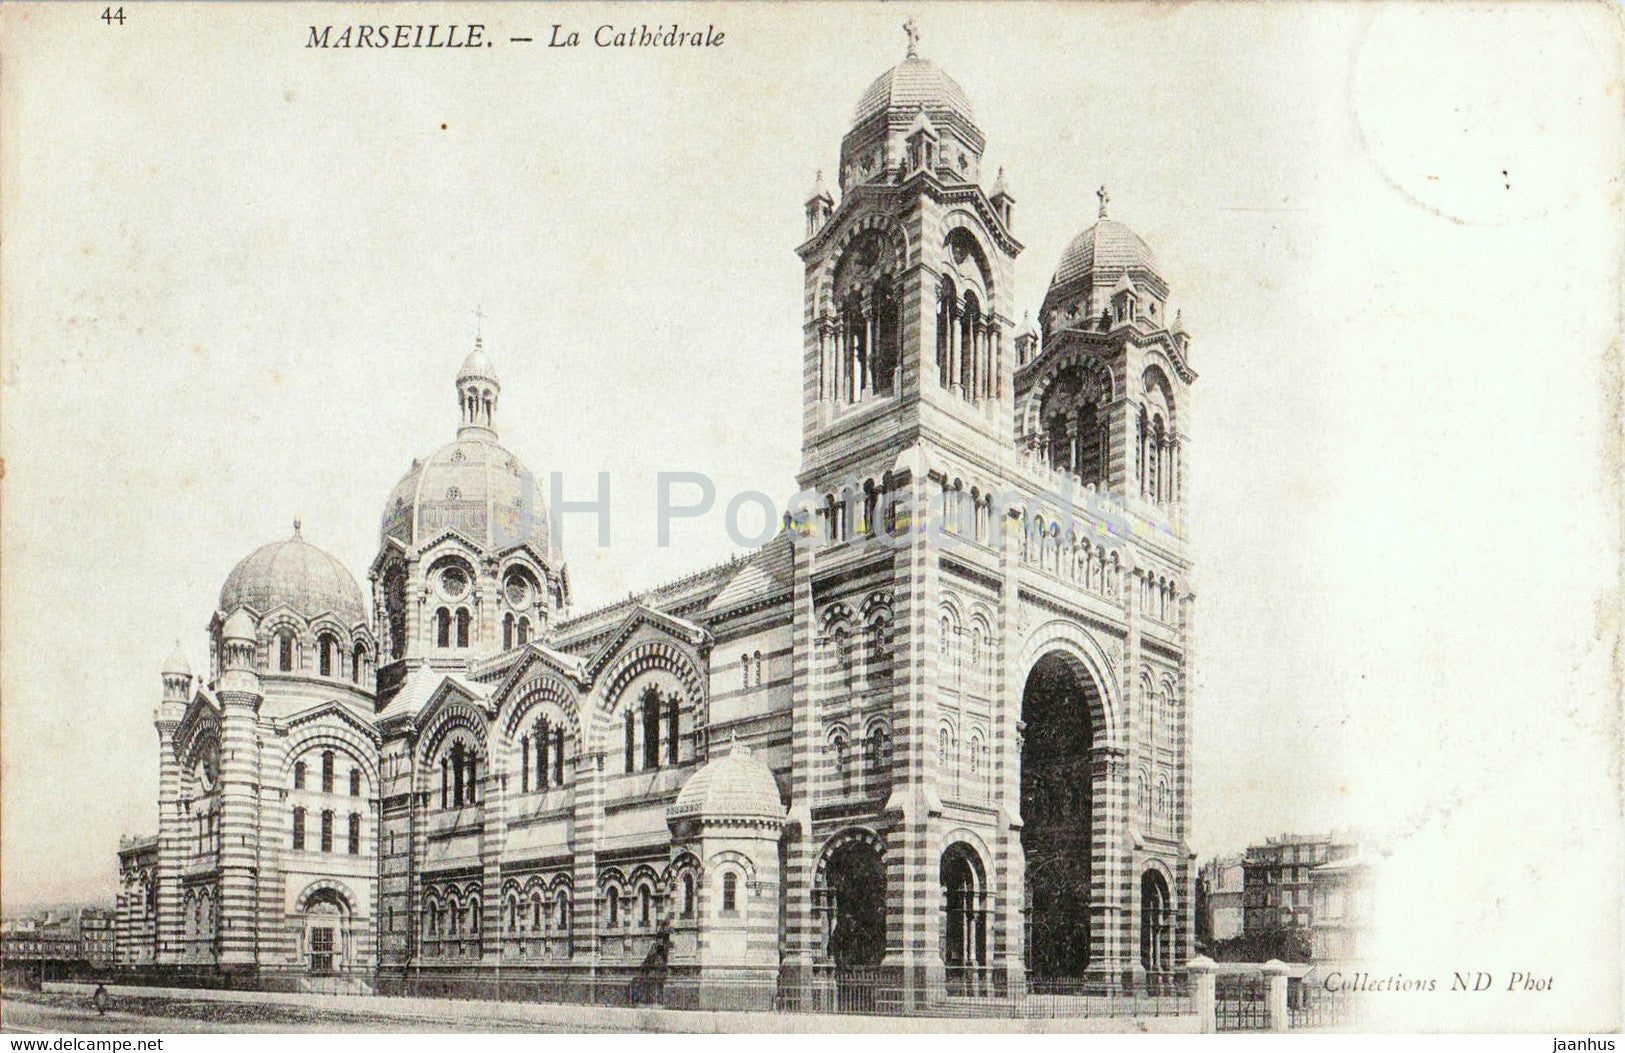 Marseille - La Cathedrale - 44 - cathedral - old postcard - 1904 - France - used - JH Postcards